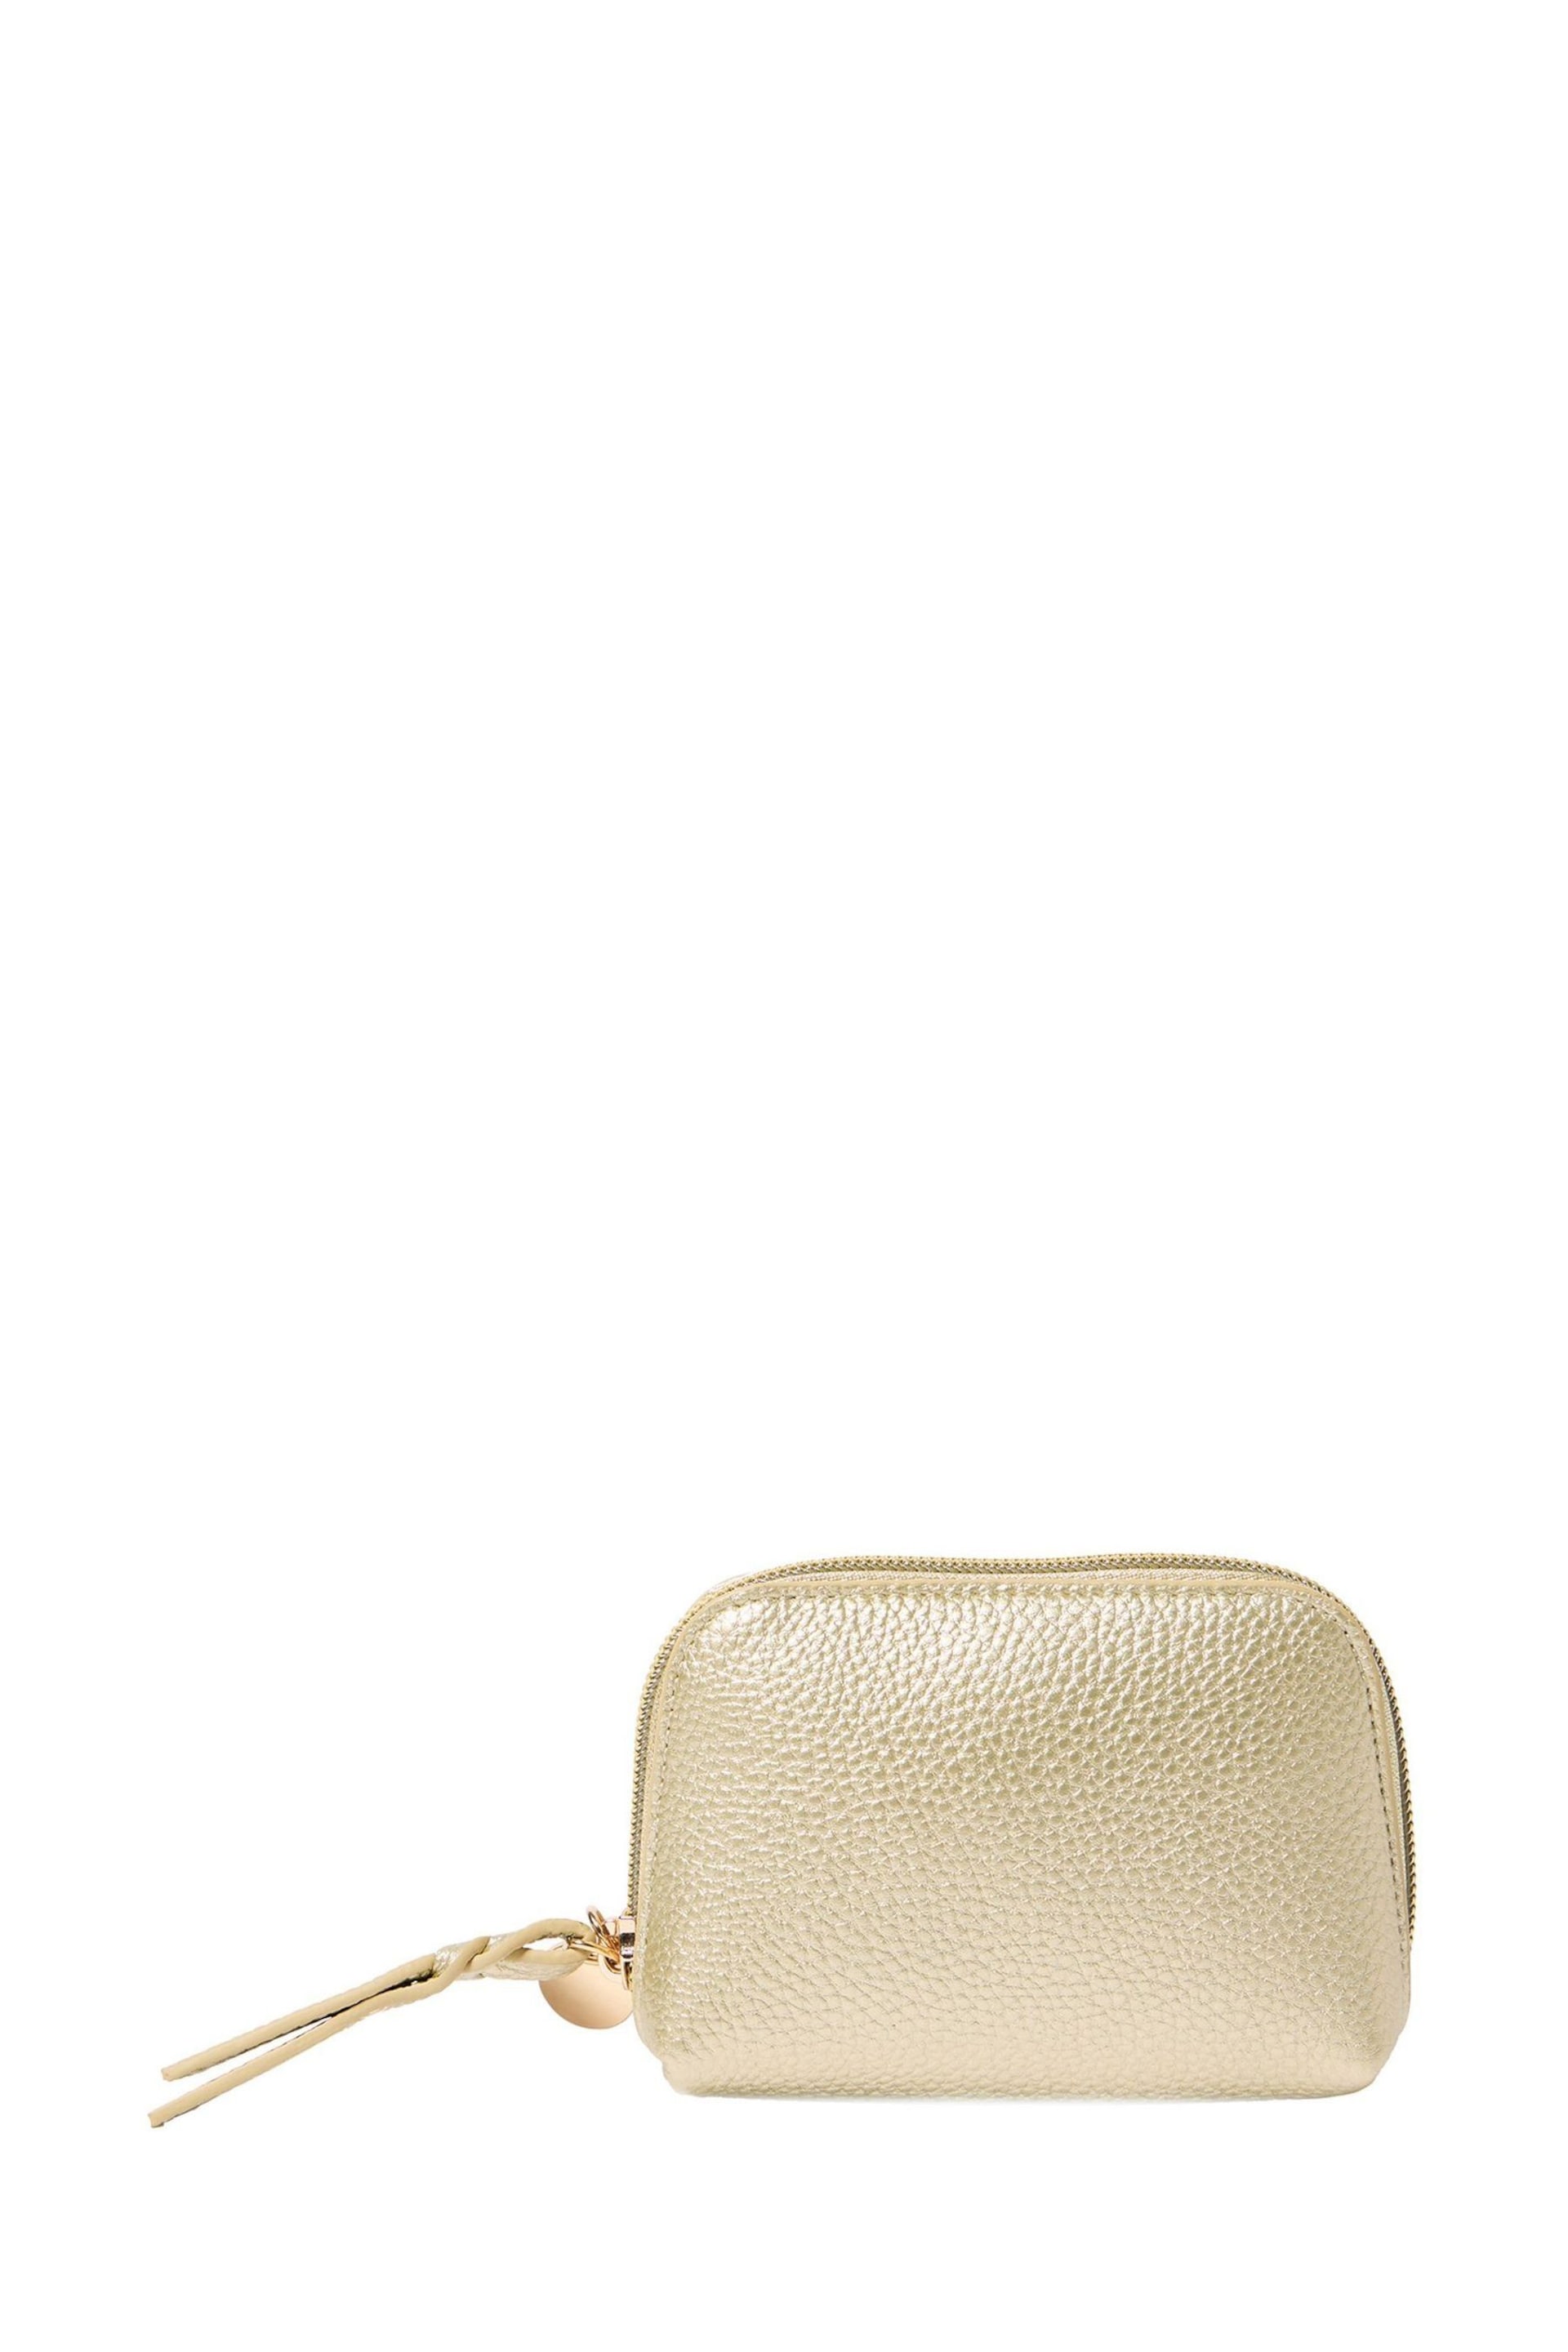 Oliver Bonas Gold Holly Zip Around Pouch - Image 3 of 6